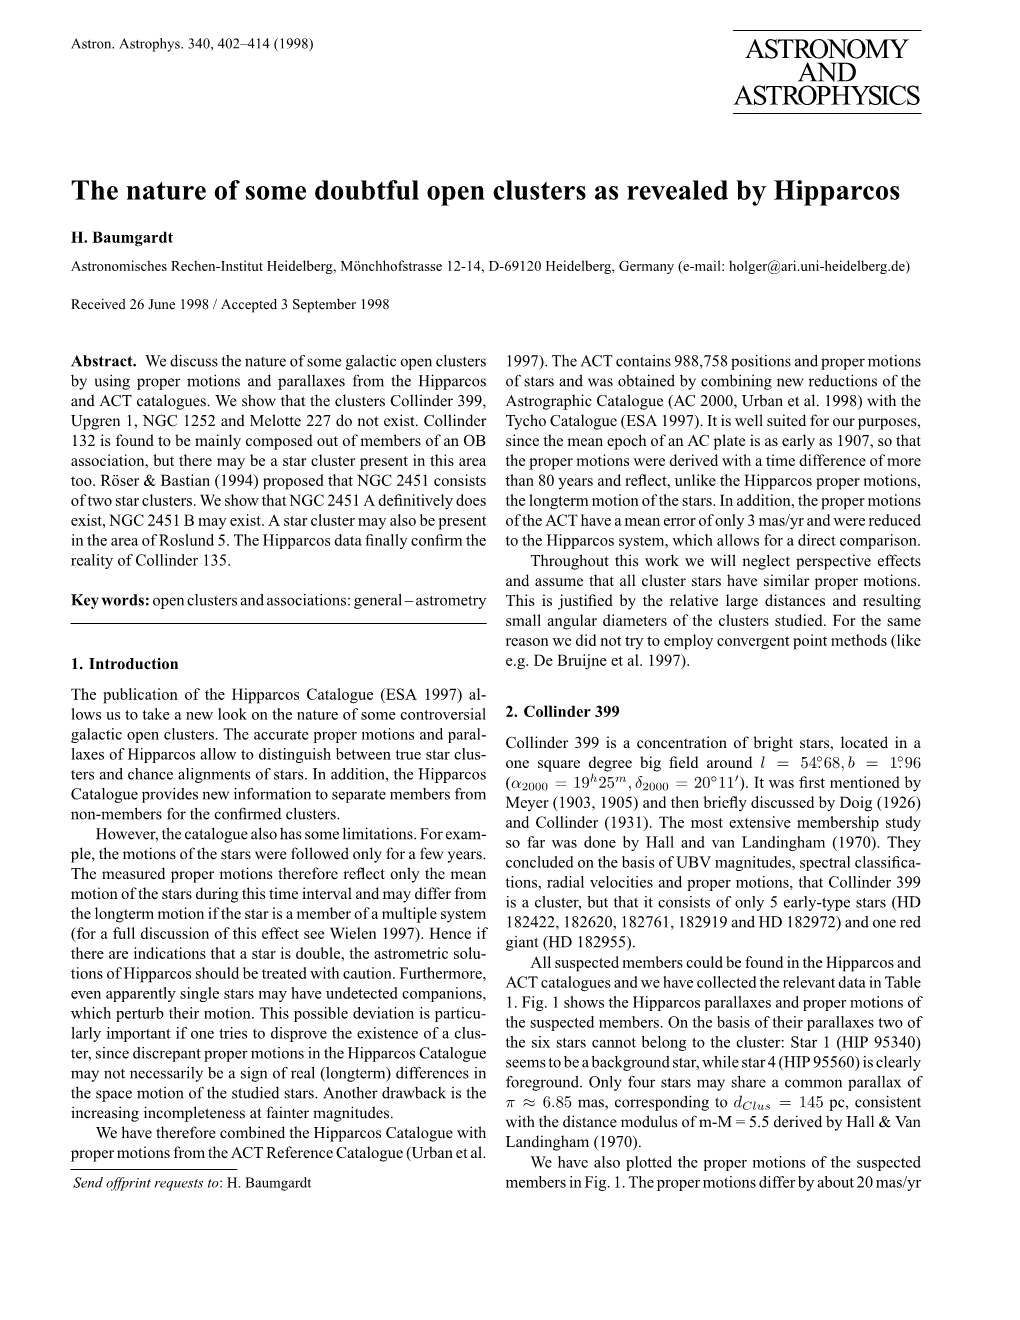 ASTRONOMY and ASTROPHYSICS the Nature of Some Doubtful Open Clusters As Revealed by Hipparcos